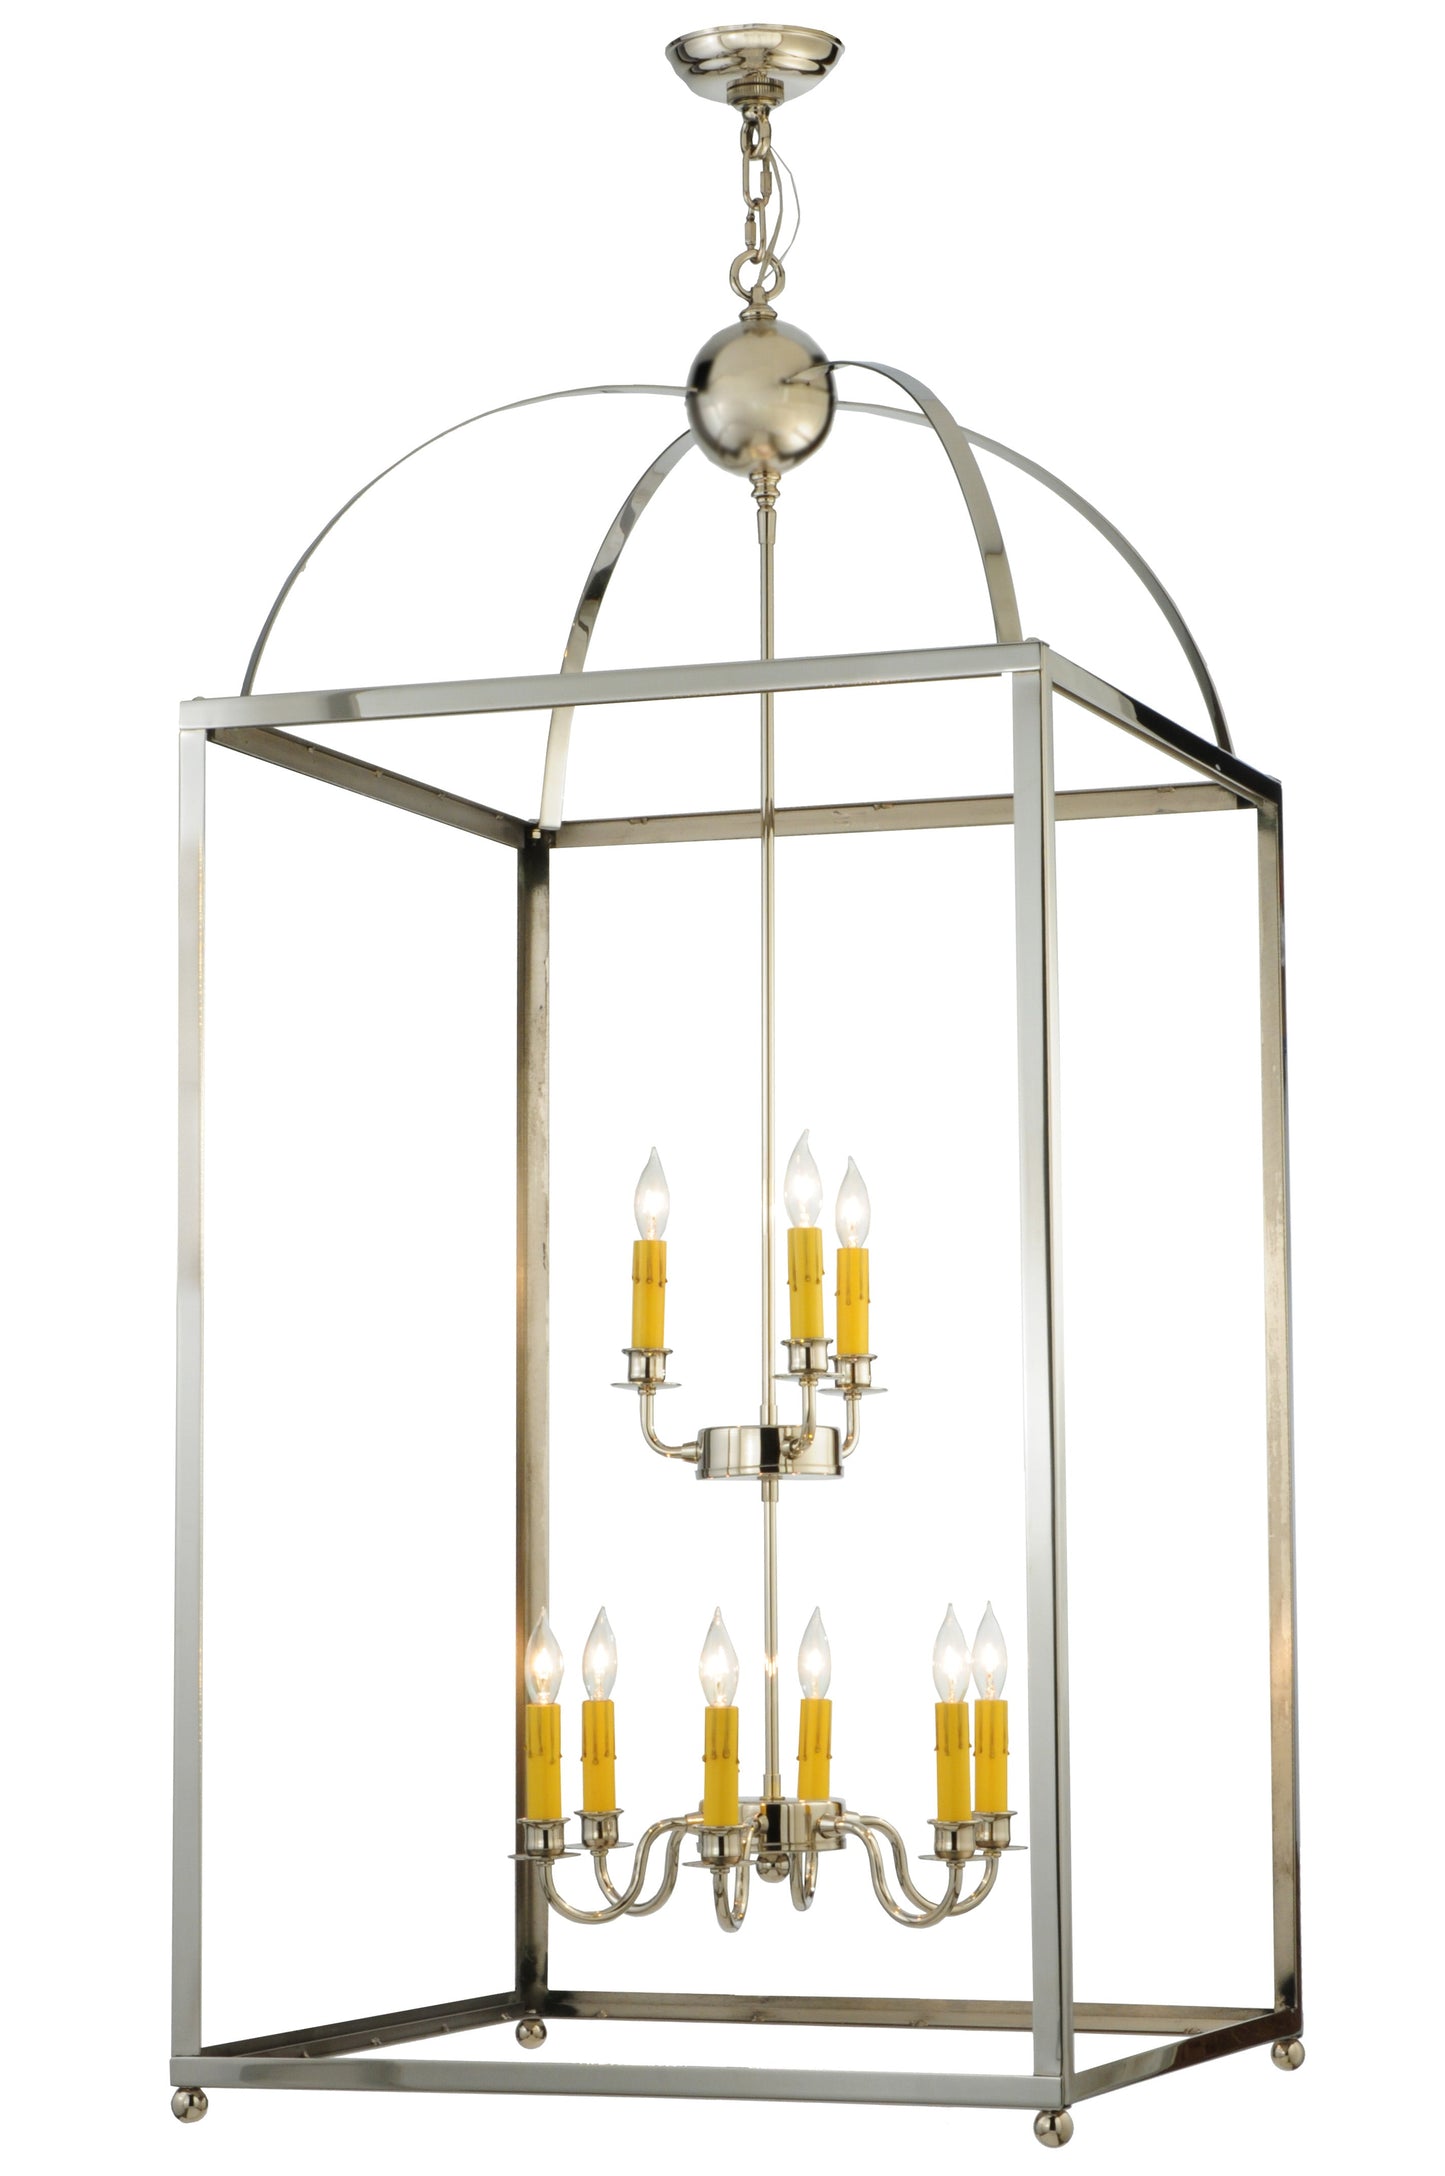 24" Square Pavilion Polished Nickel Pendant by 2nd Ave Lighting